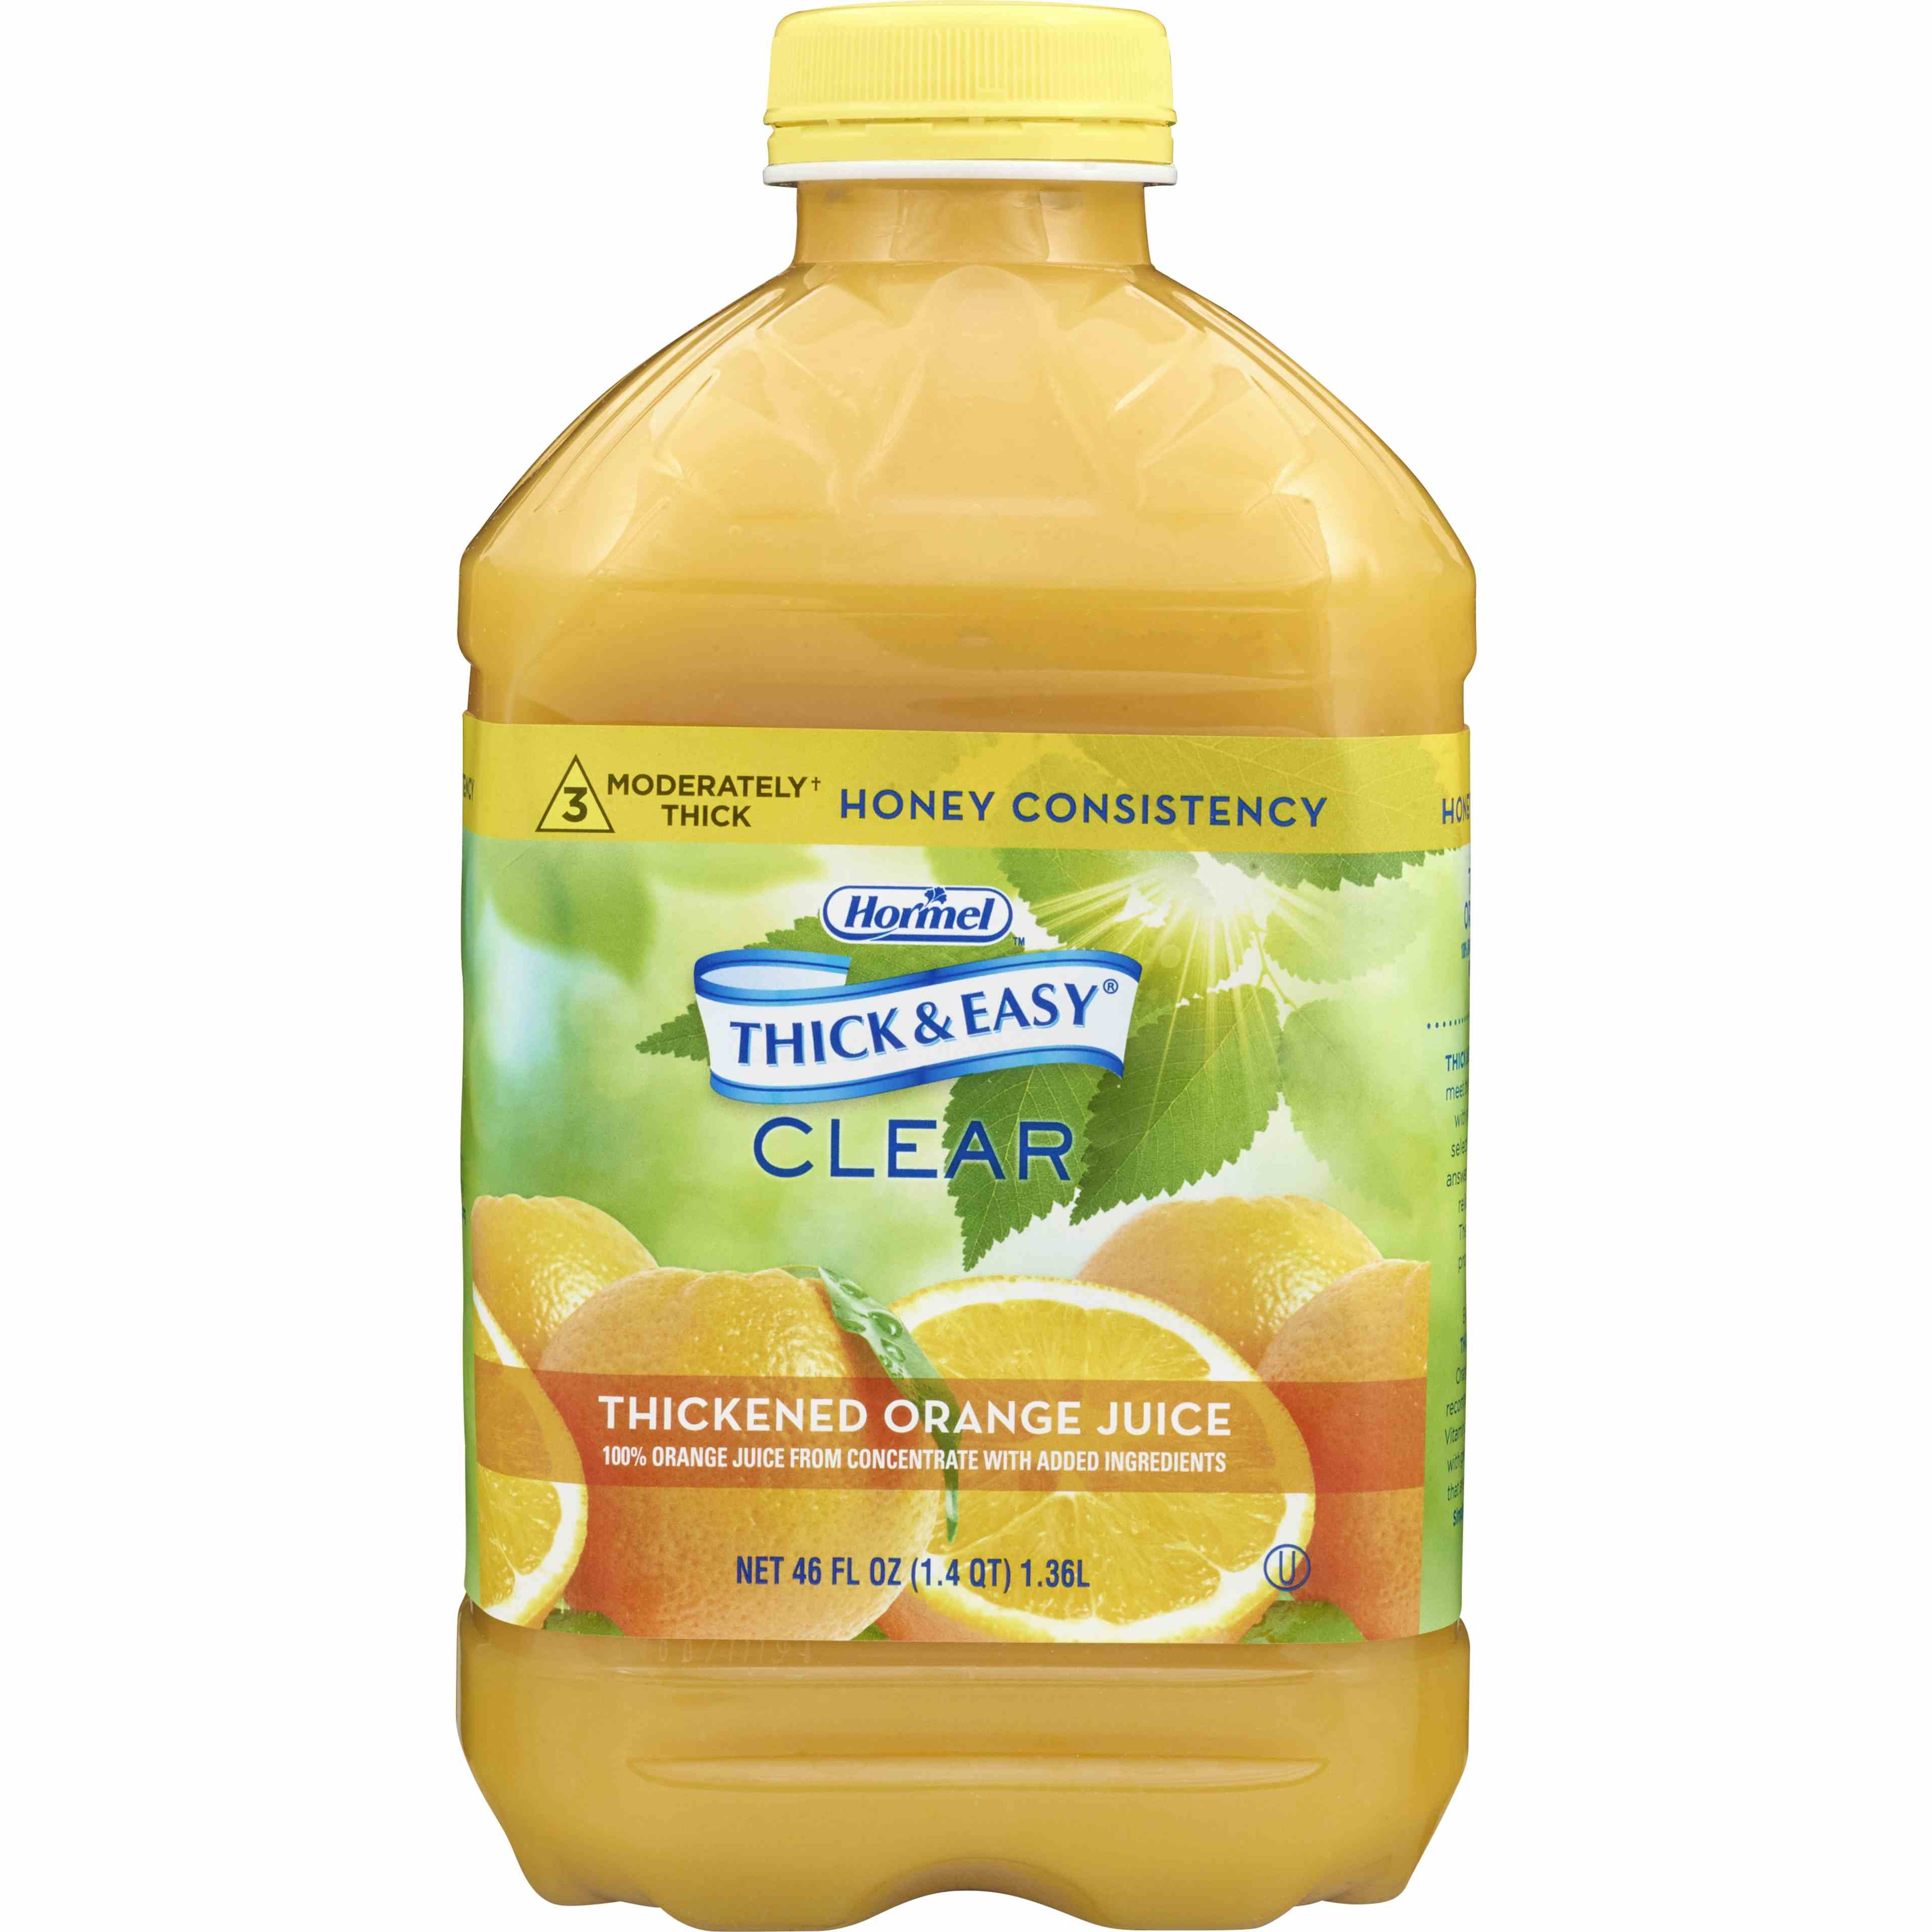 Thick & Easy Clear Honey Consistency Orange Juice Thickened Beverage, 46 oz. Bottle, 40123, 1 Each